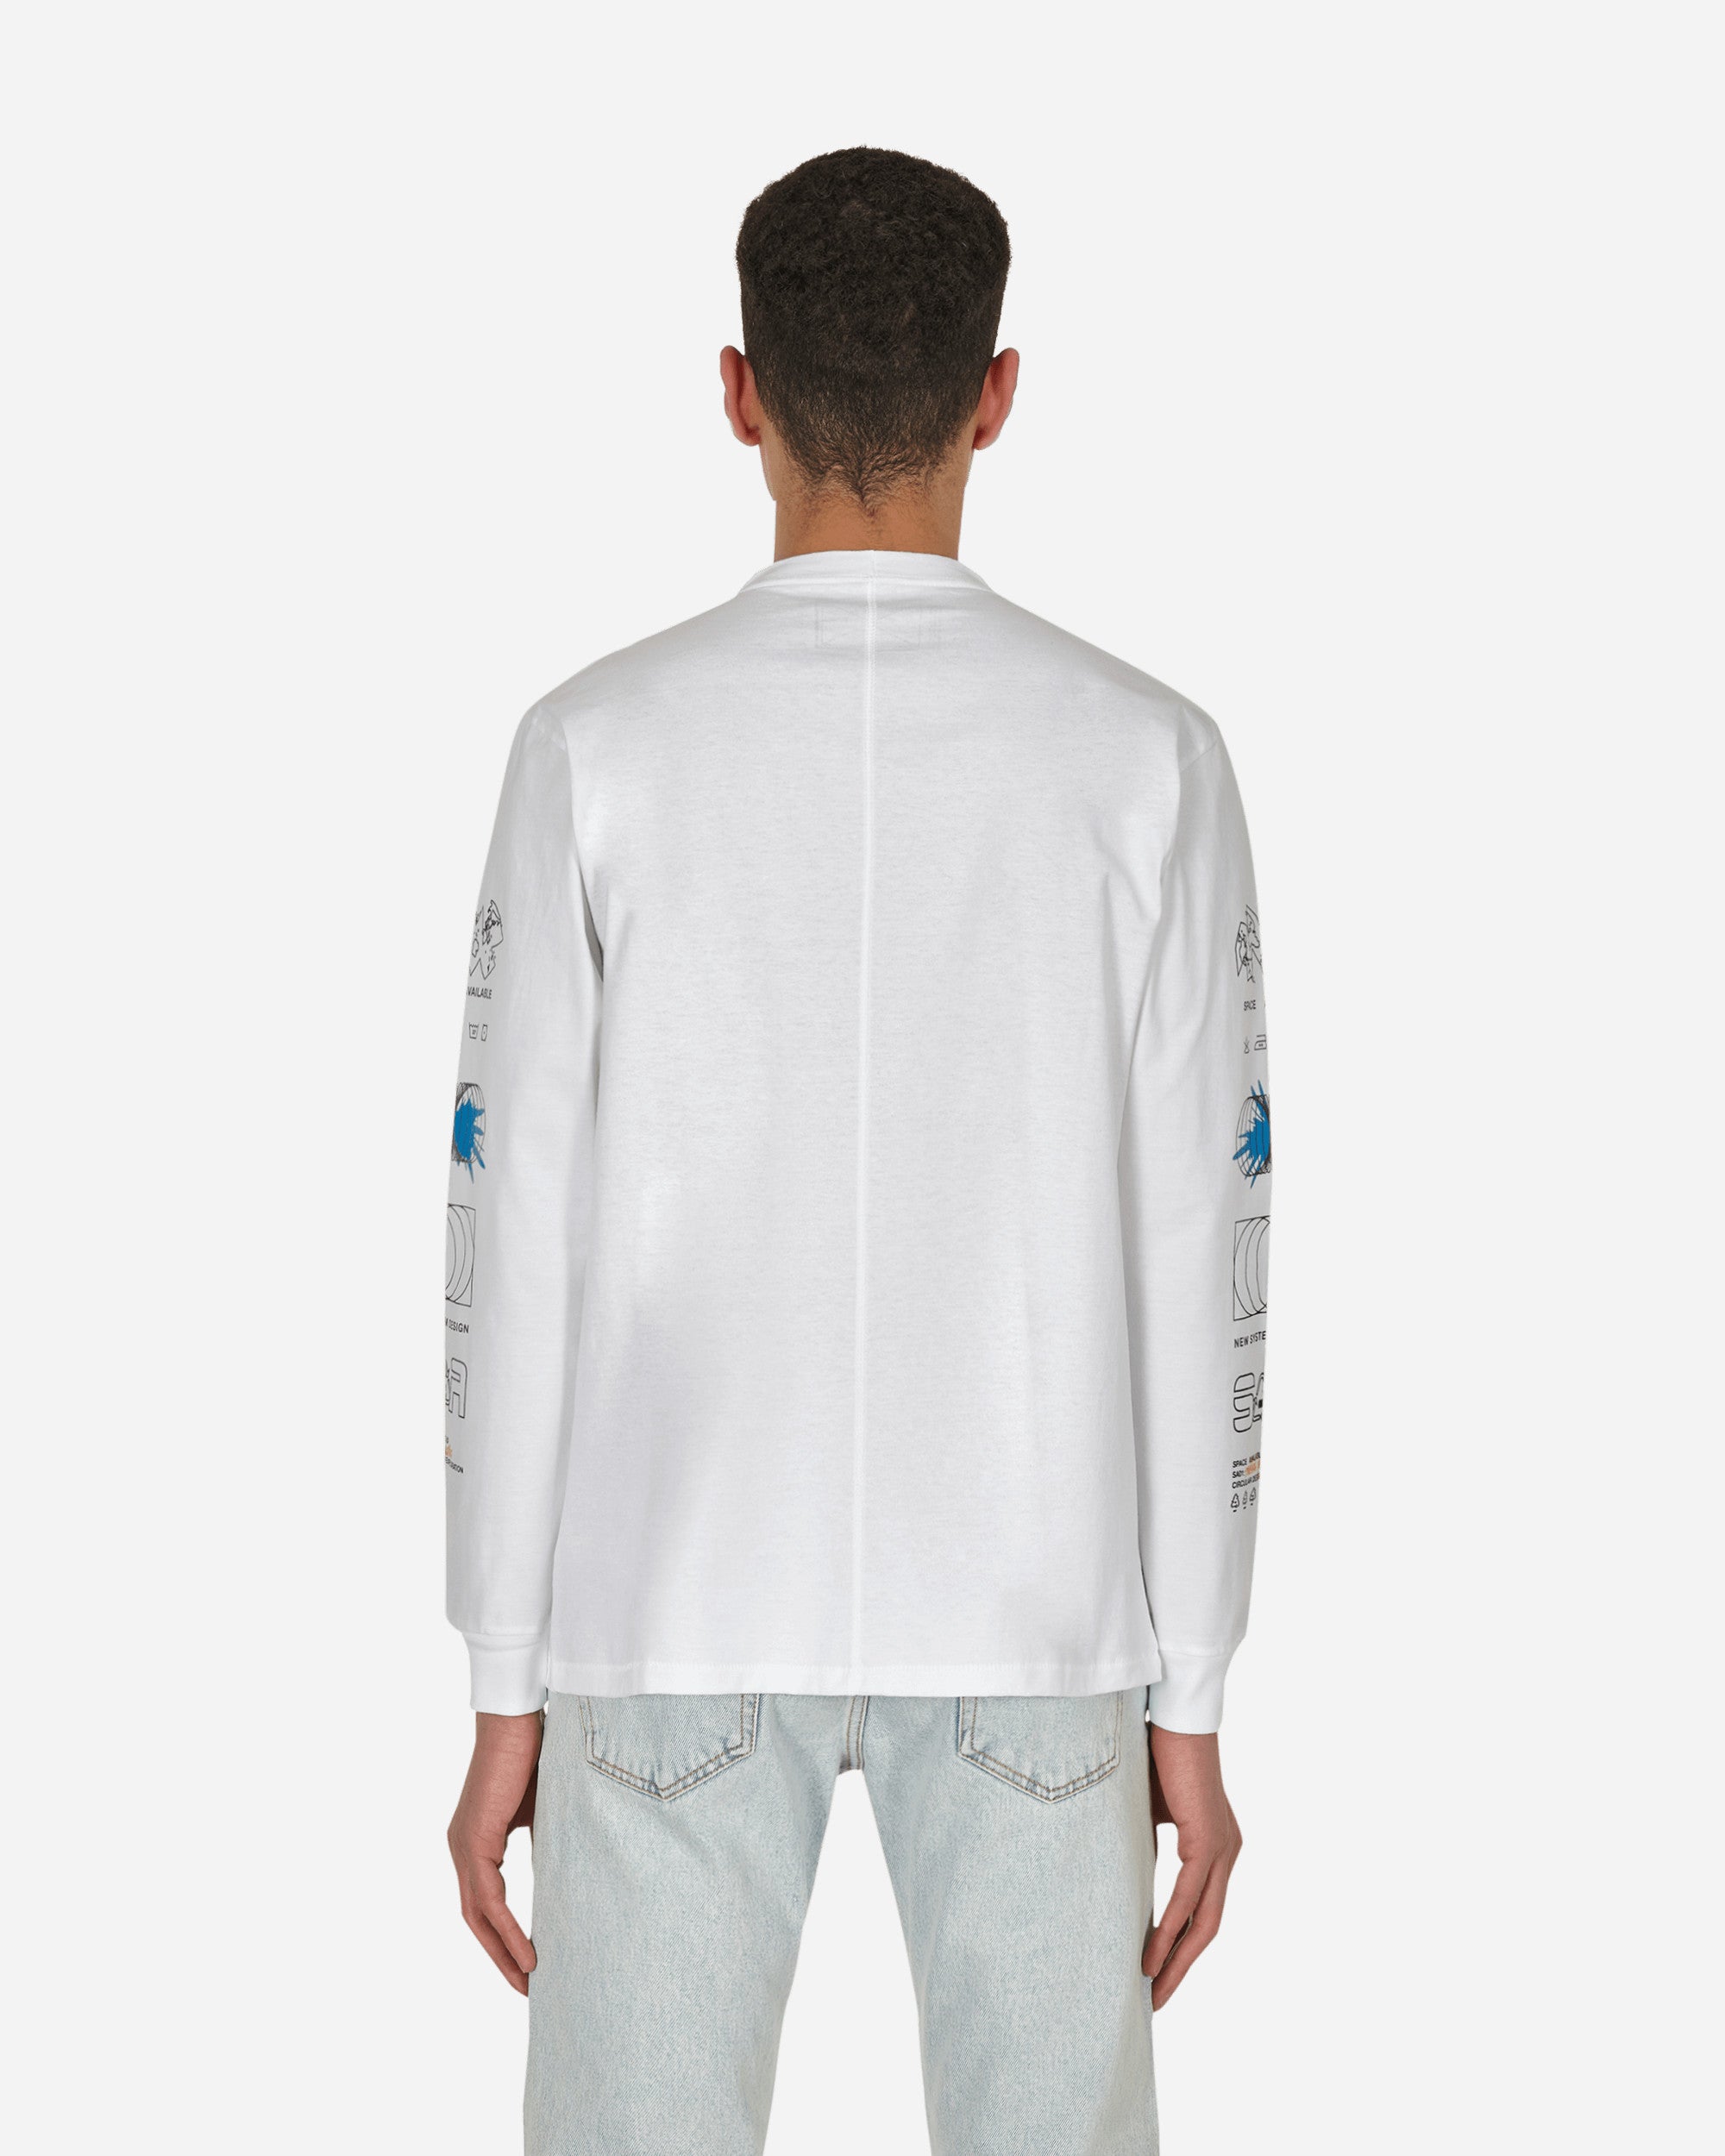 Space Available Oneness White T-Shirts Longsleeve SA-OT002-WHT WHITE